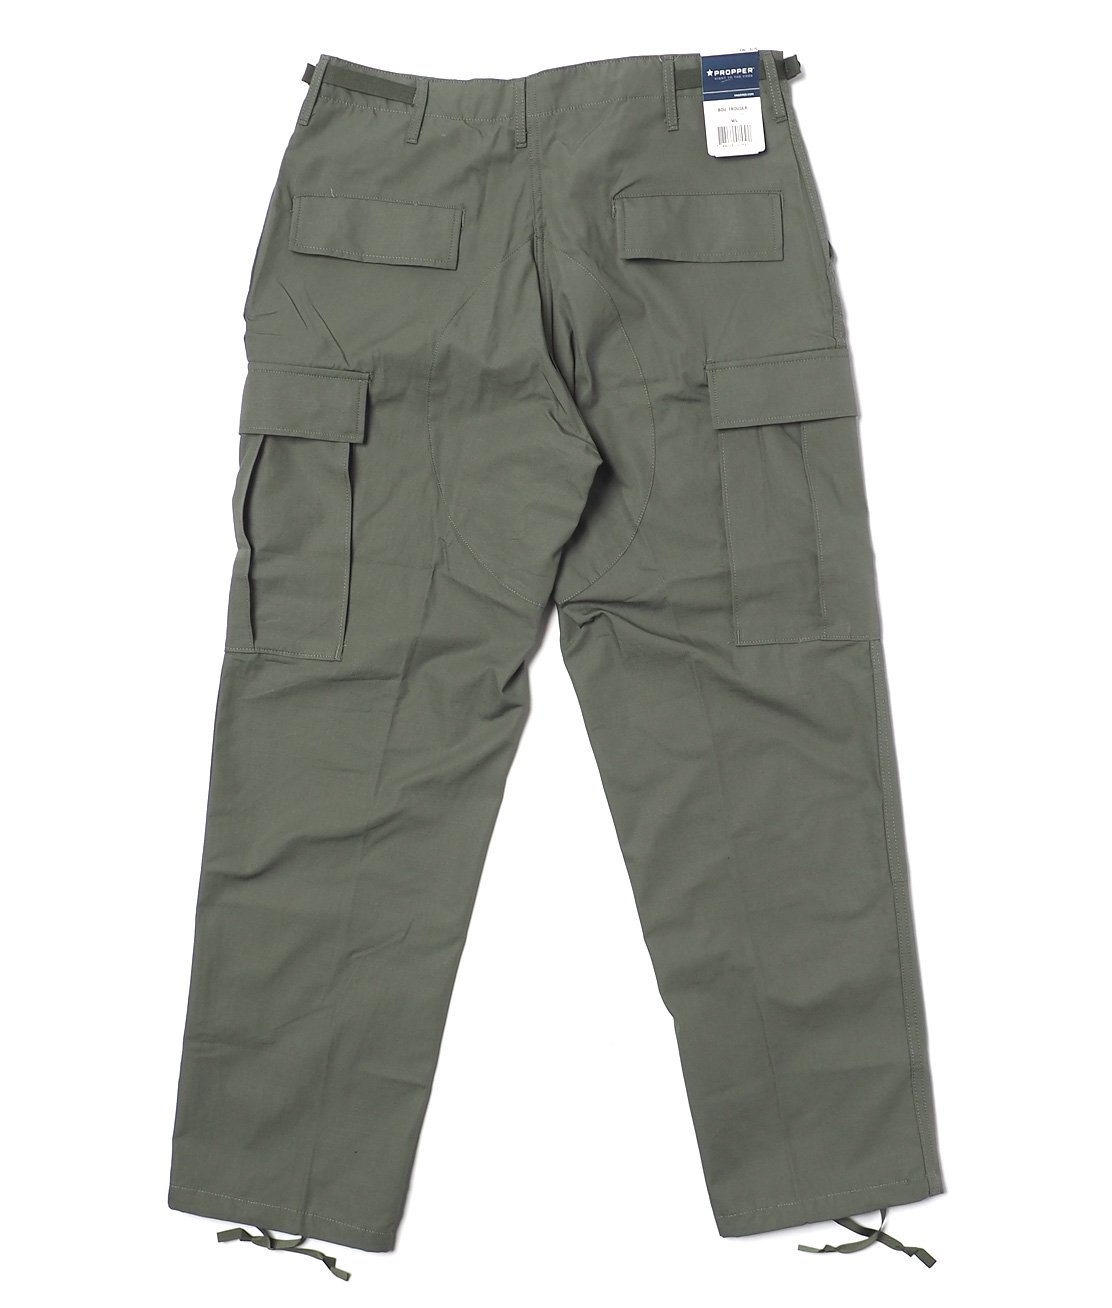 US ARMY TROUSERS/ Cargo Pants カーゴパンツ BDU